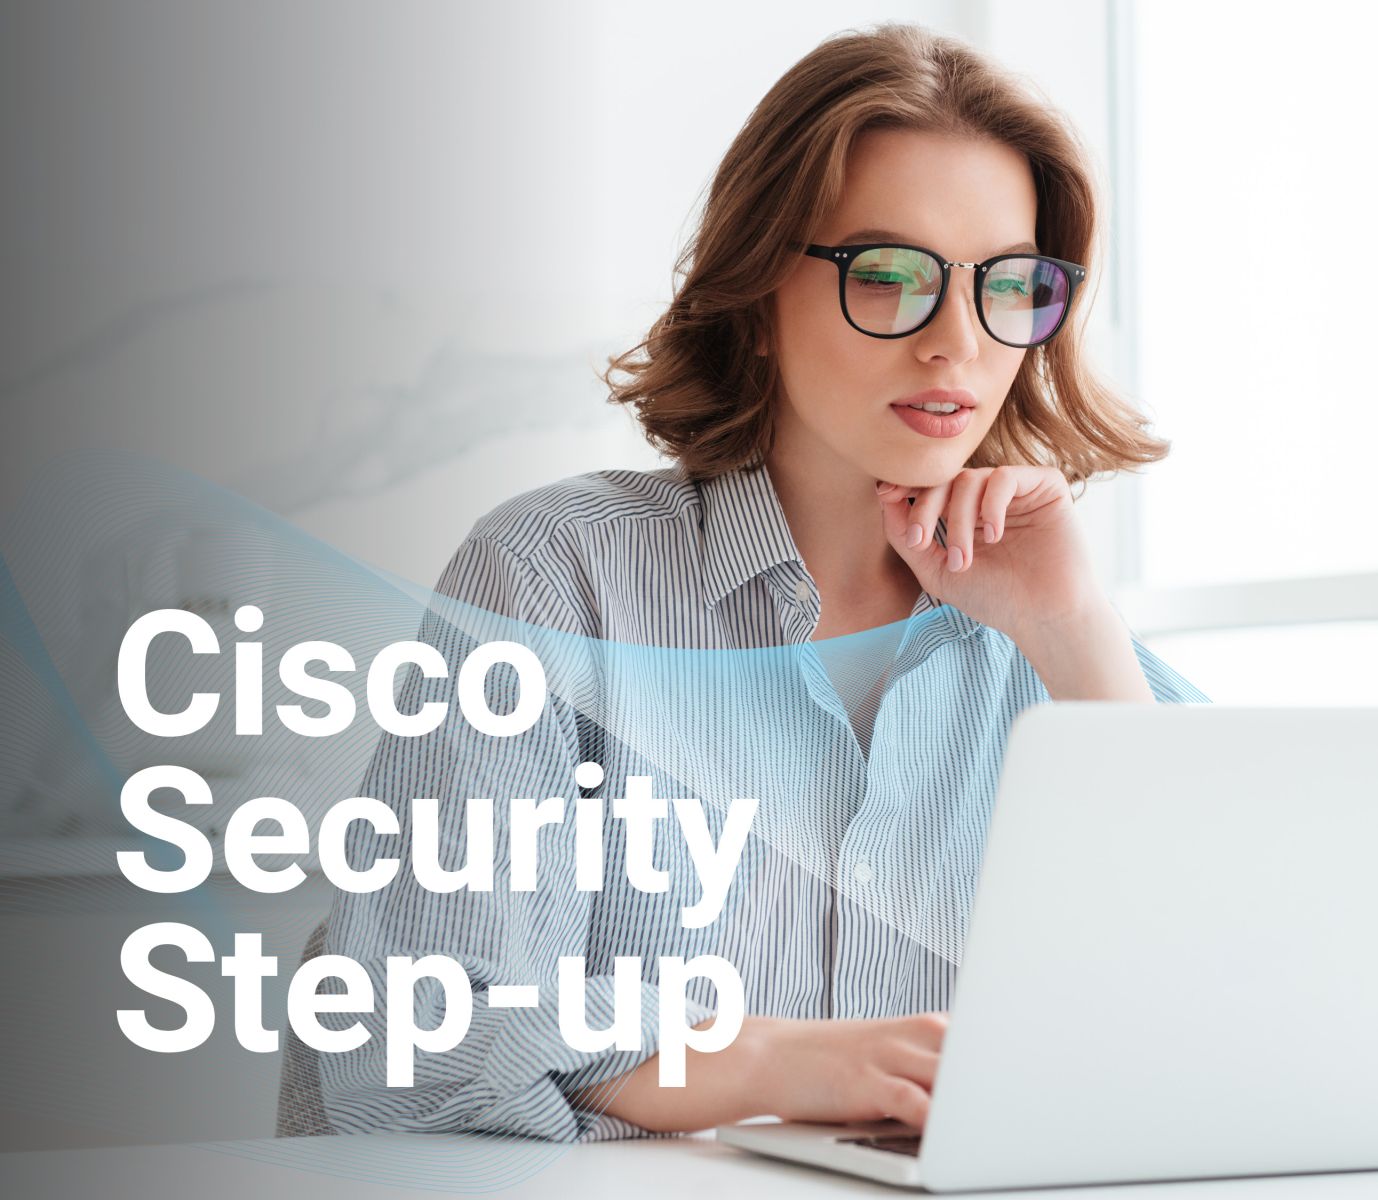 Featured Image: IMSecure Discover "Cisco+ Secure Connect" with Ingram Micro